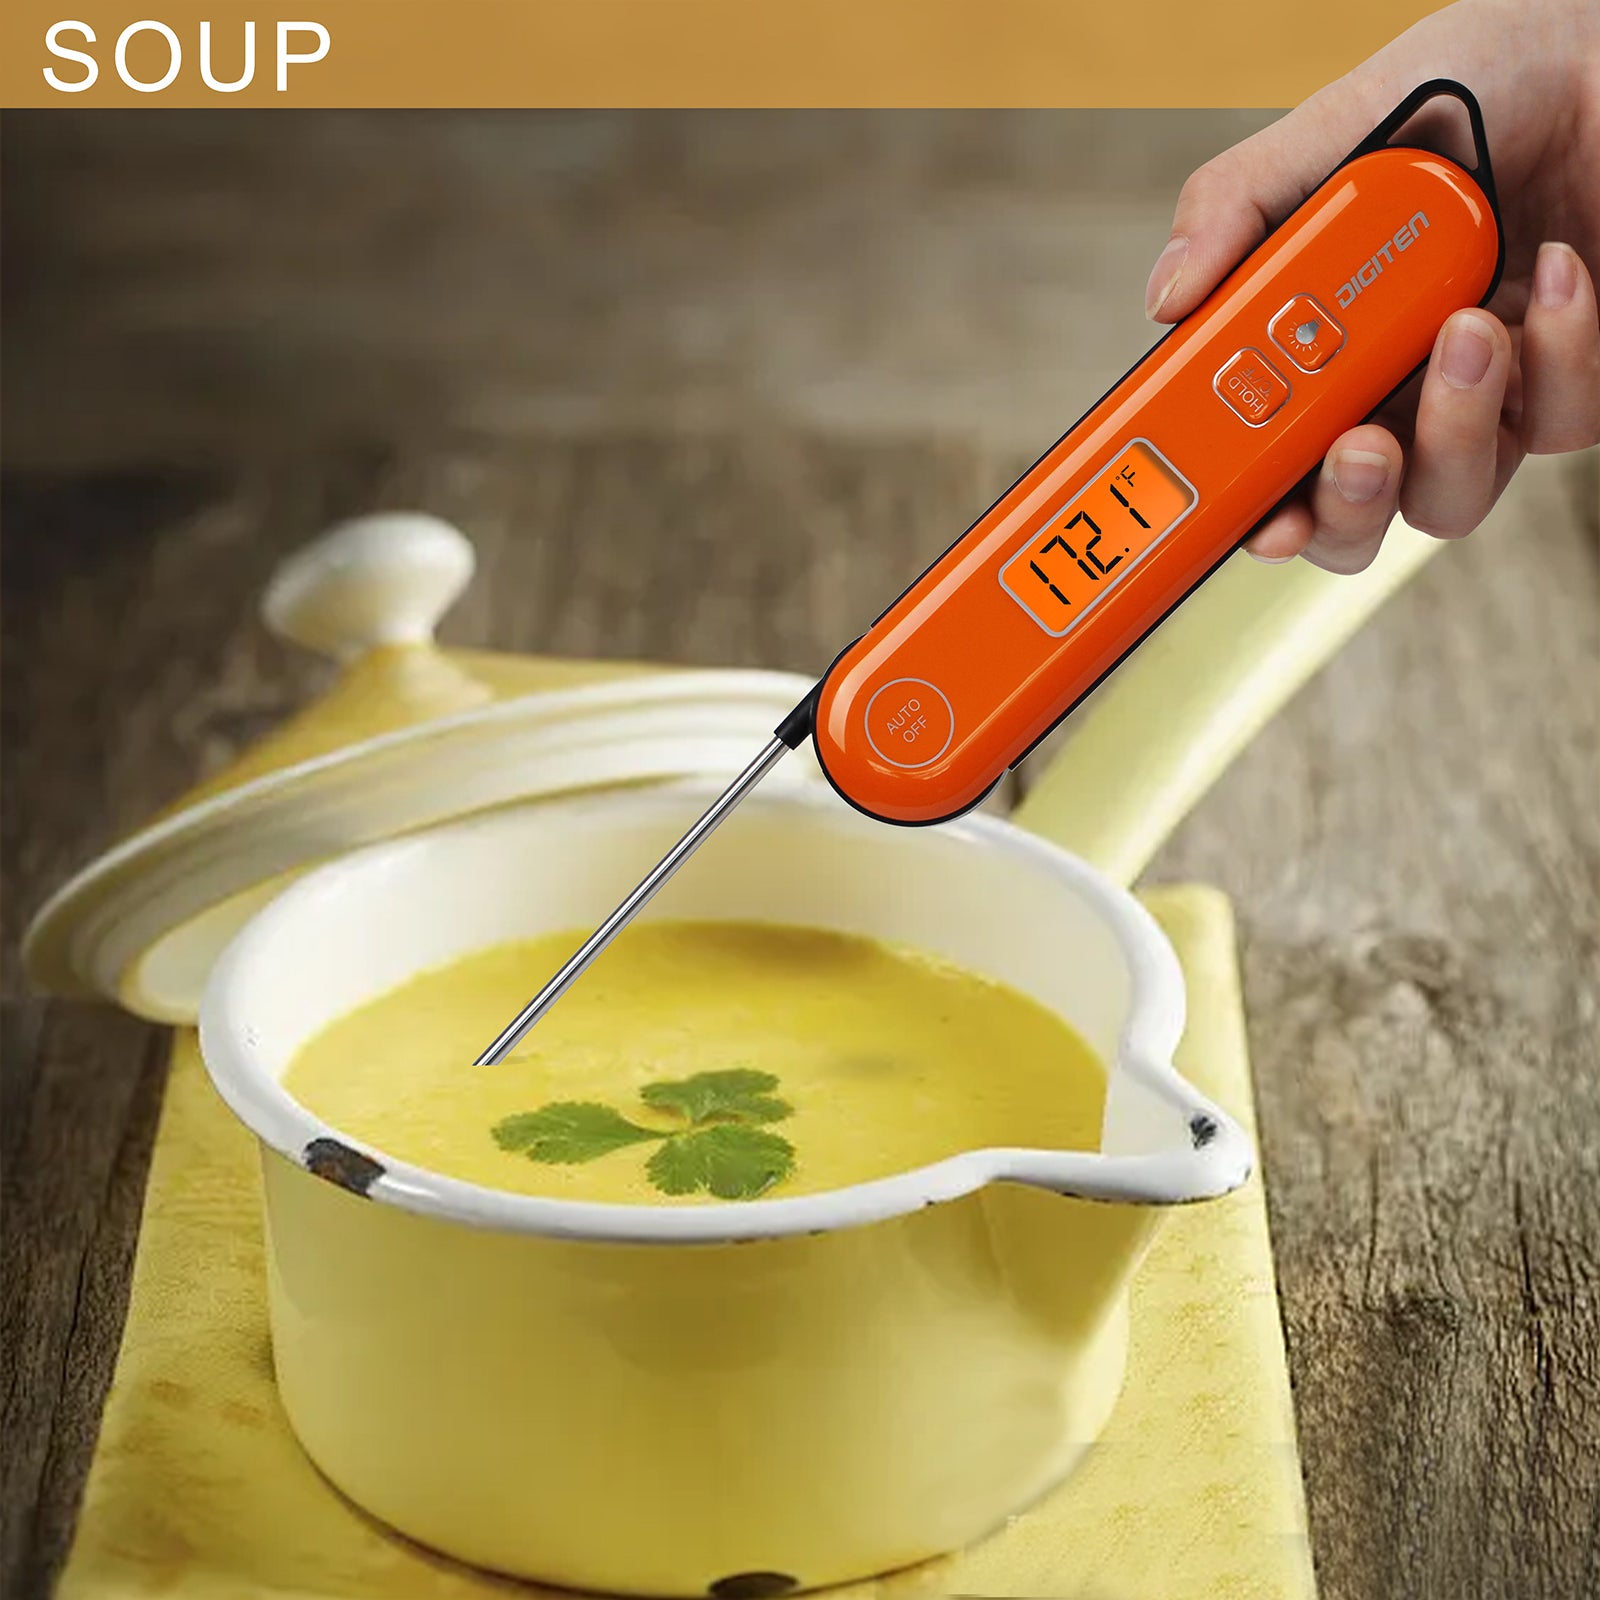 Customized Room Thermometer - Noodle Soup